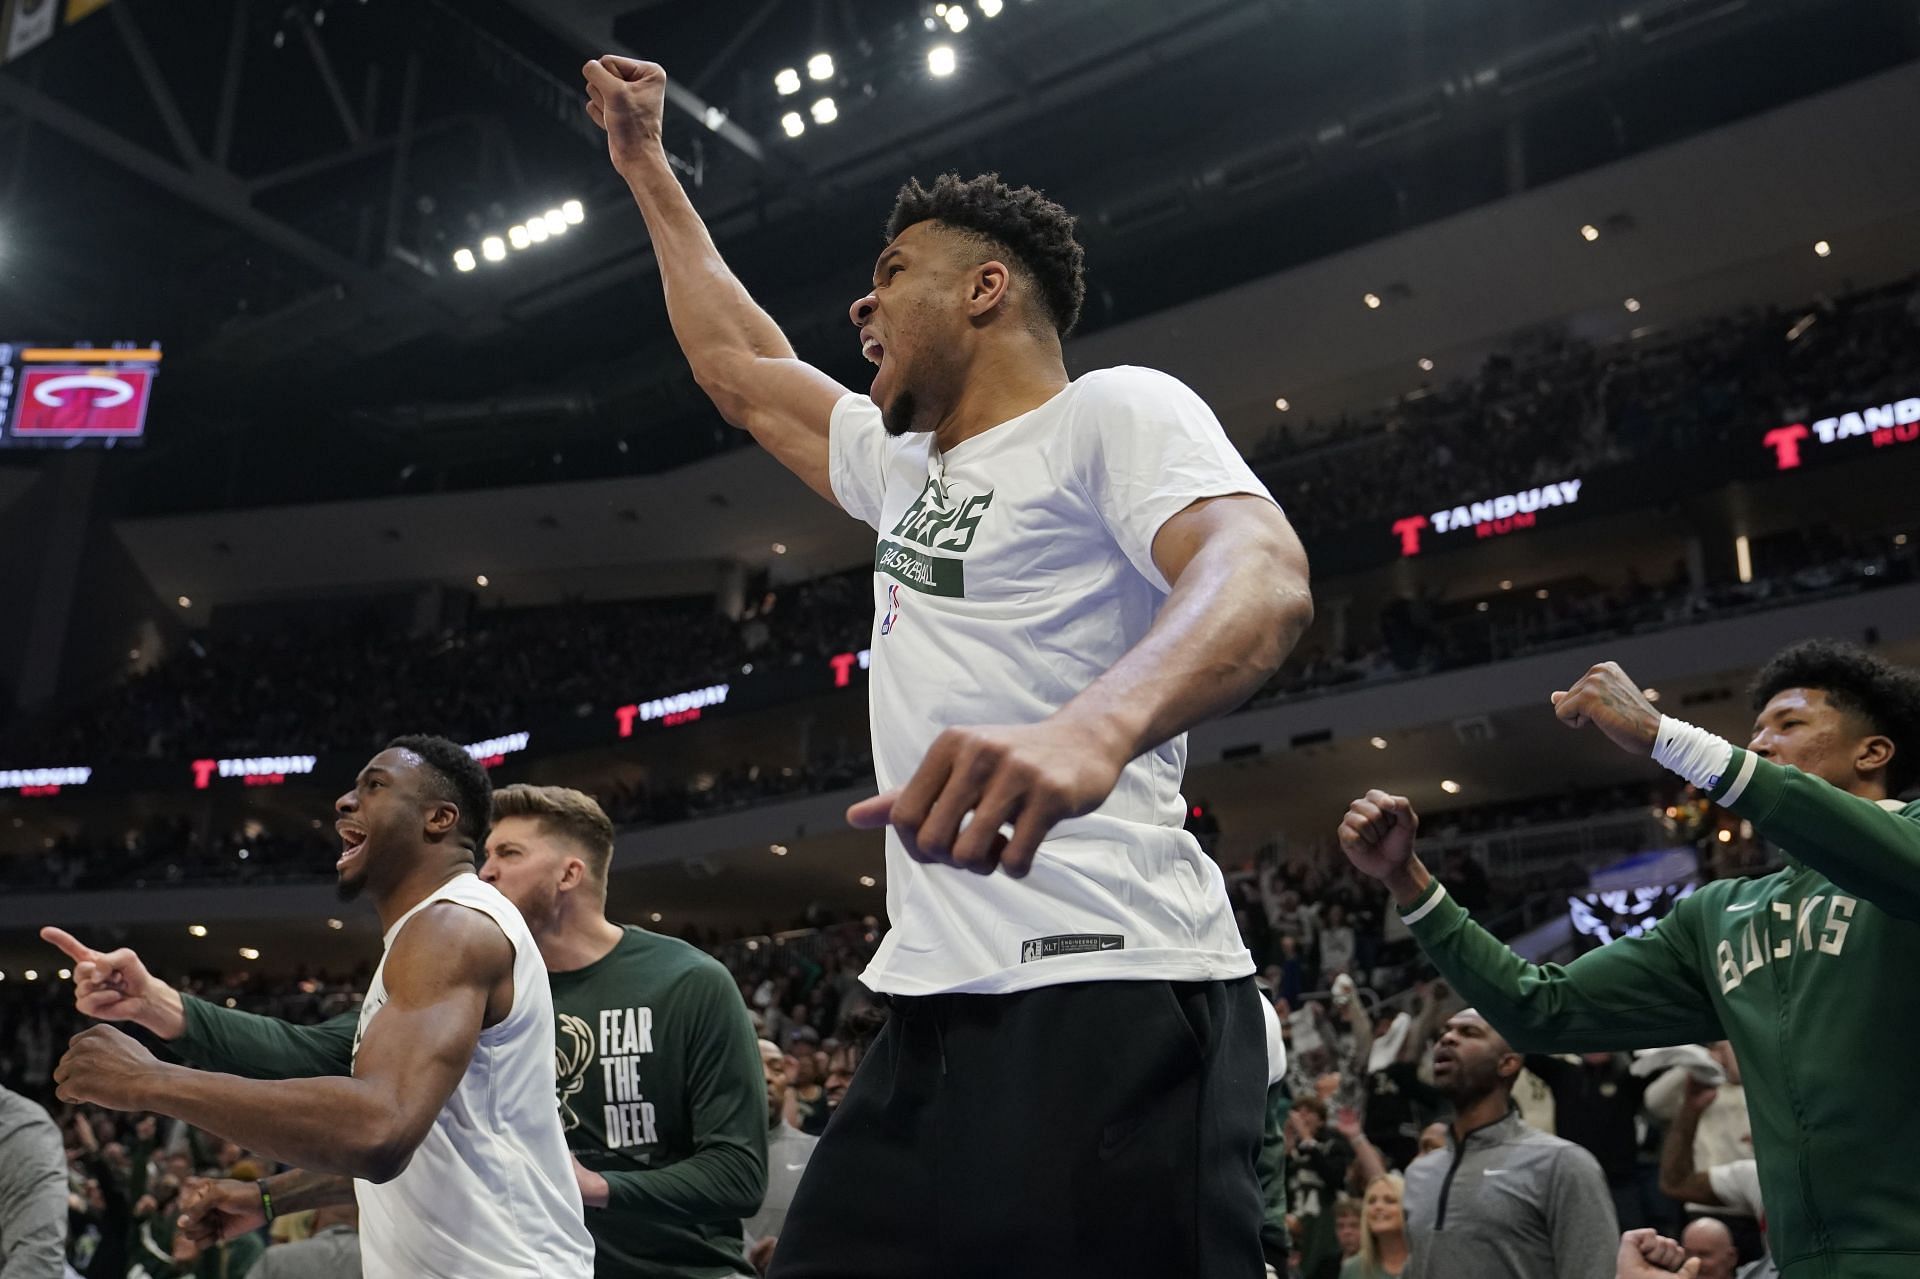 Giannis Antetokounmpo is questionable for the Milwaukee Bucks heading into Game 3 against the Miami Heat.